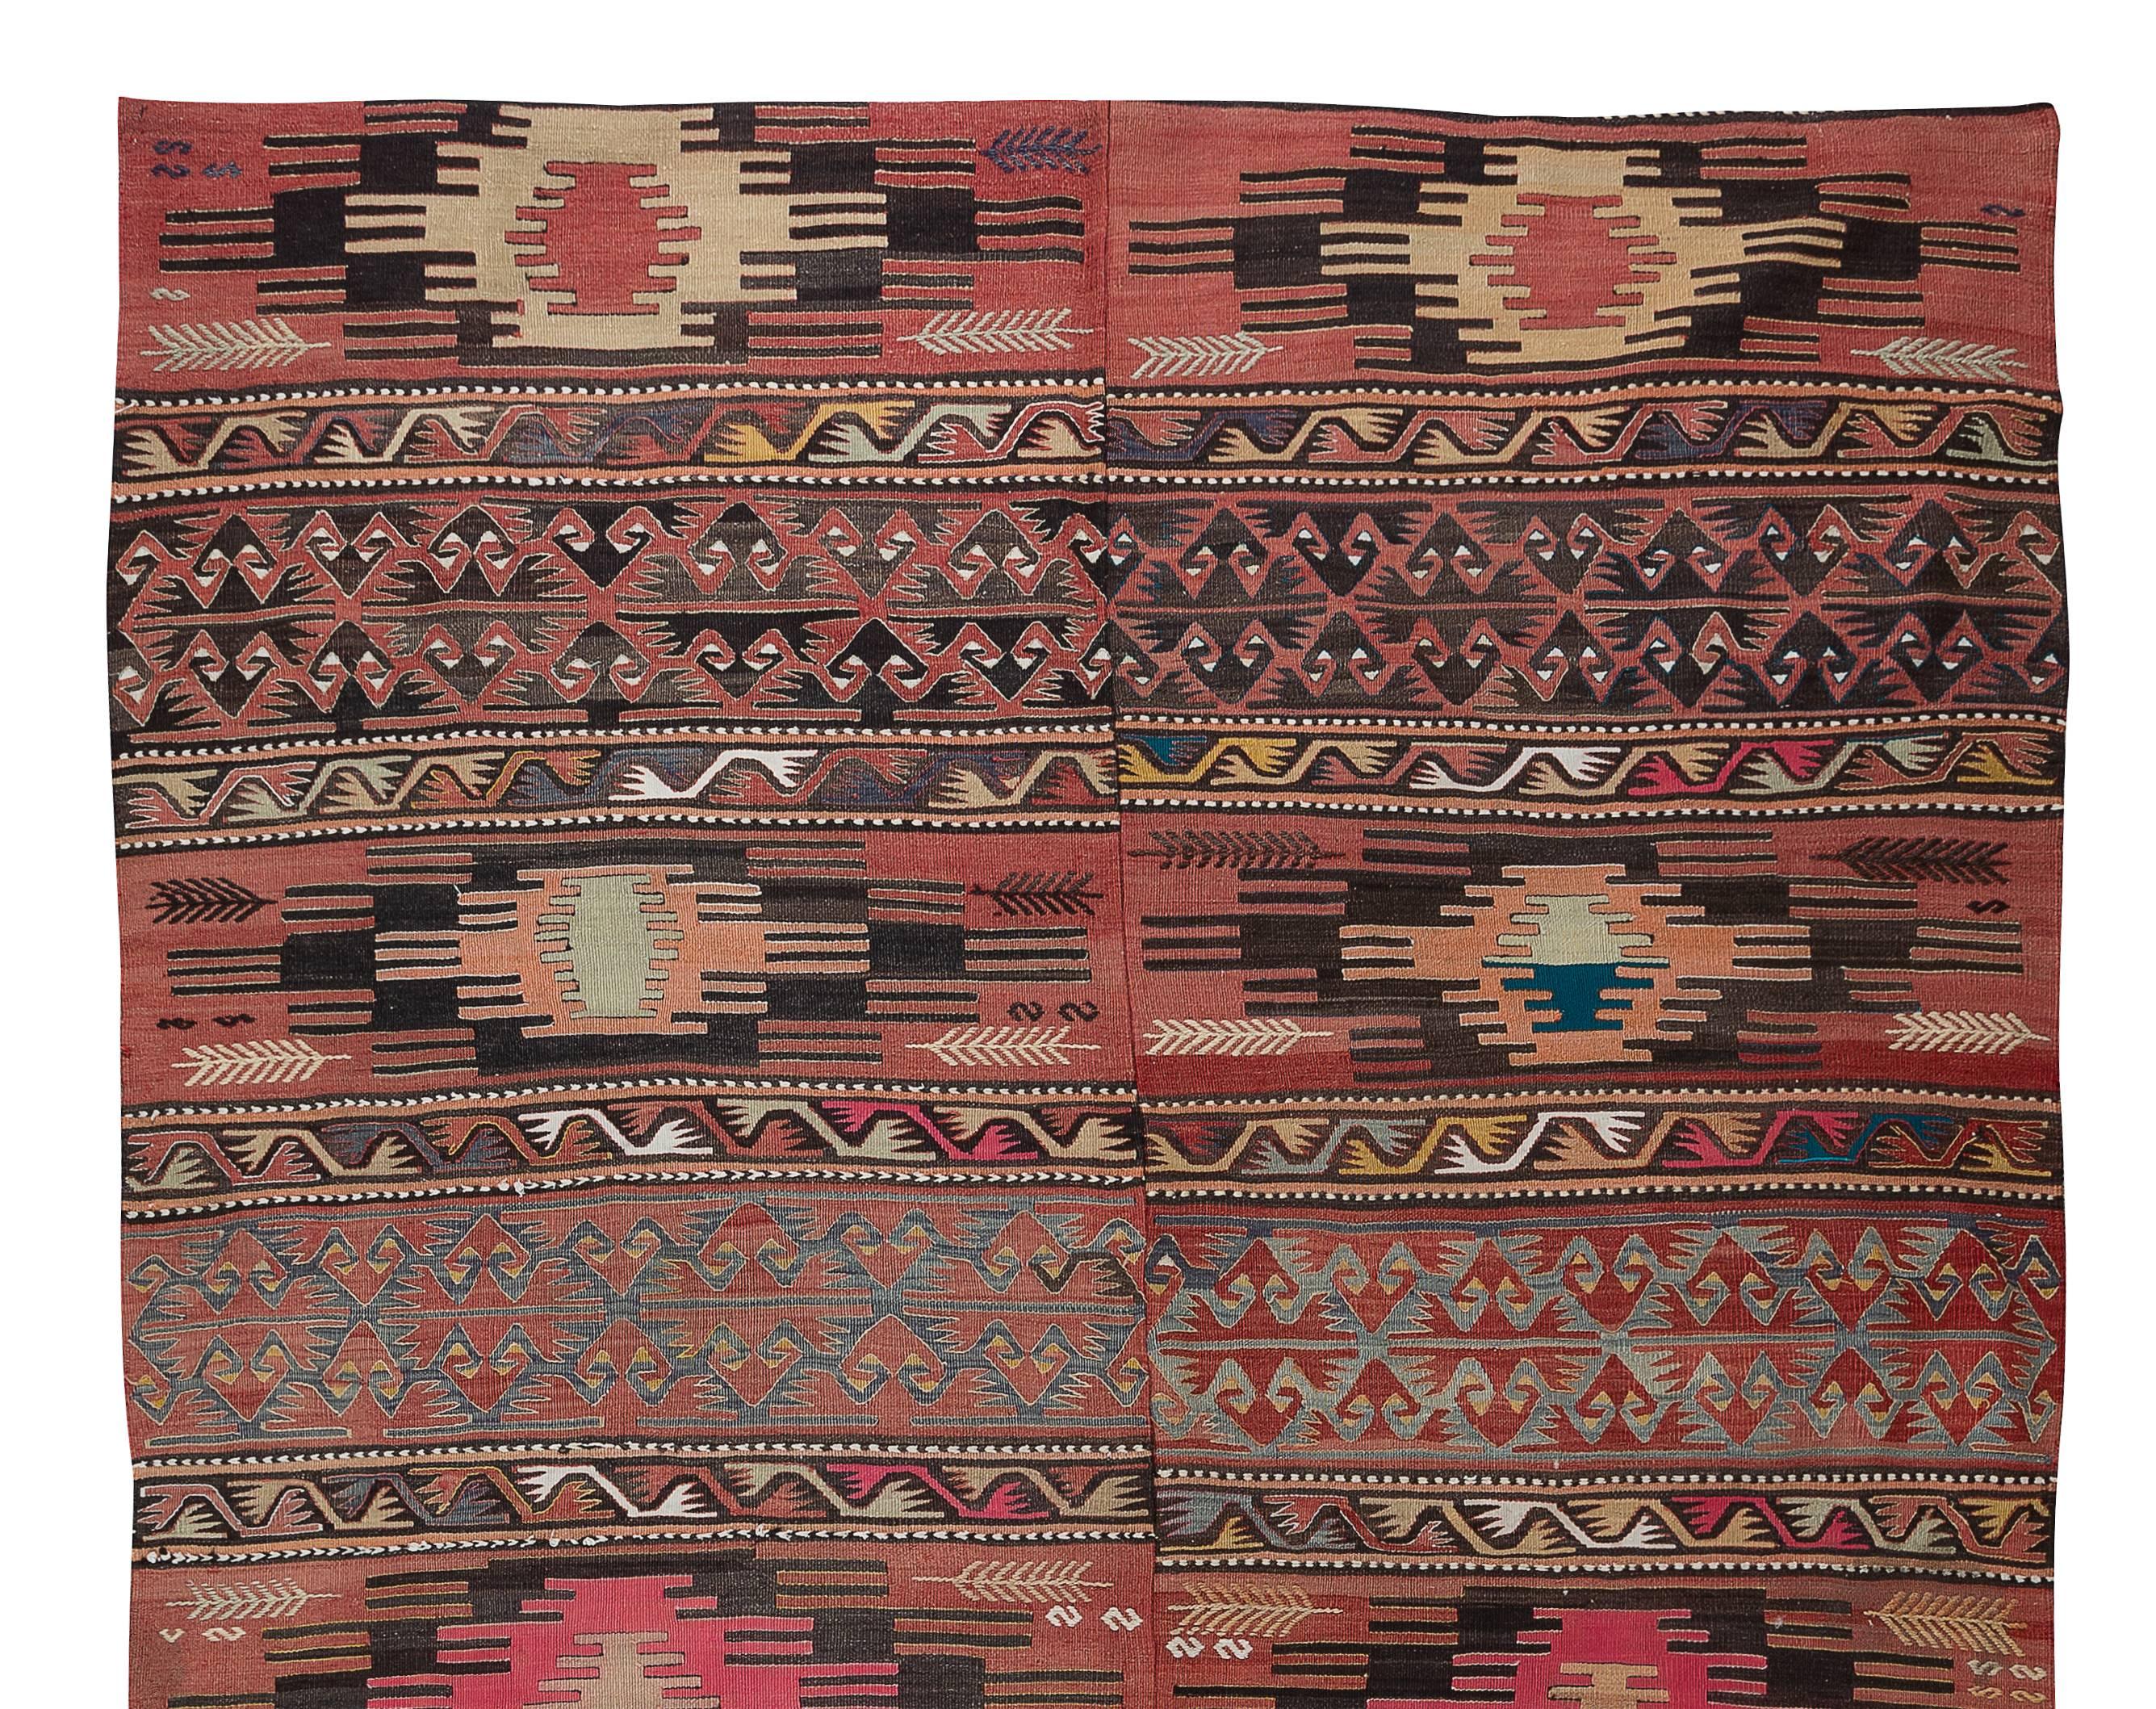 6.3x10.2 Ft Vintage Hand-Woven Nomadic Anatolian Kilim 'Flat-Weave', 100% Wool In Good Condition For Sale In Philadelphia, PA